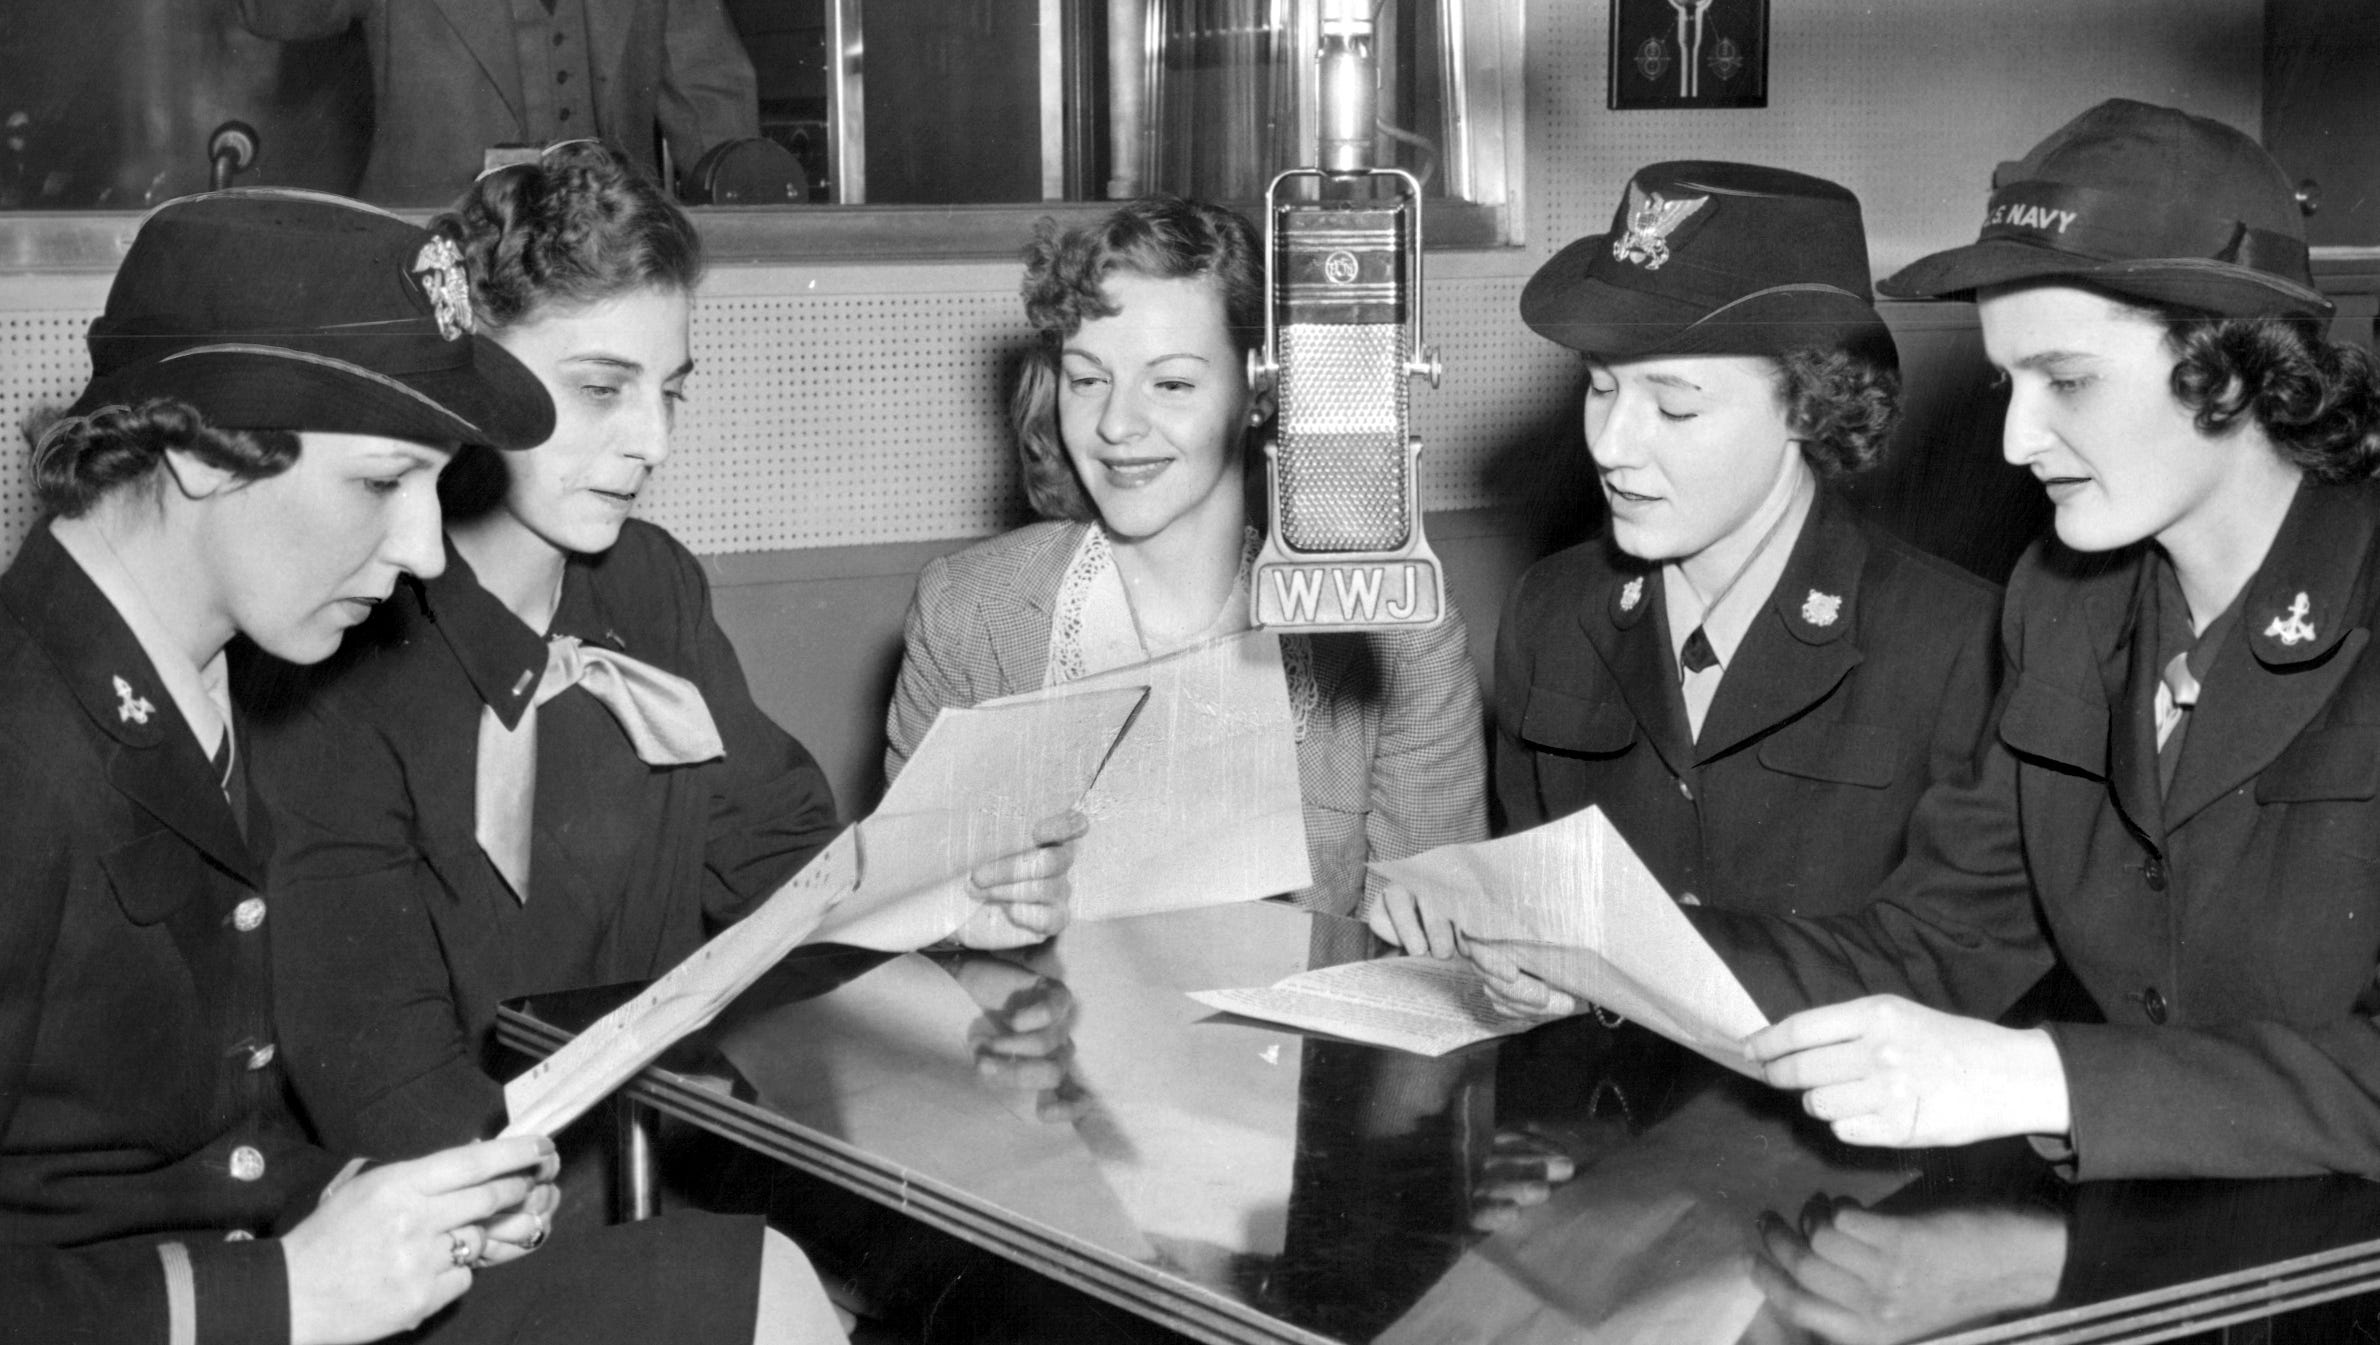 WWJ announcer Gwen Firmin, center, is on the air on March 18, 1943 with four women in the armed services -- 
Helen Shea, Helen Stewart, Elizabeth Barmes, Mary Jane Dougherty -- in this official Navy photo.